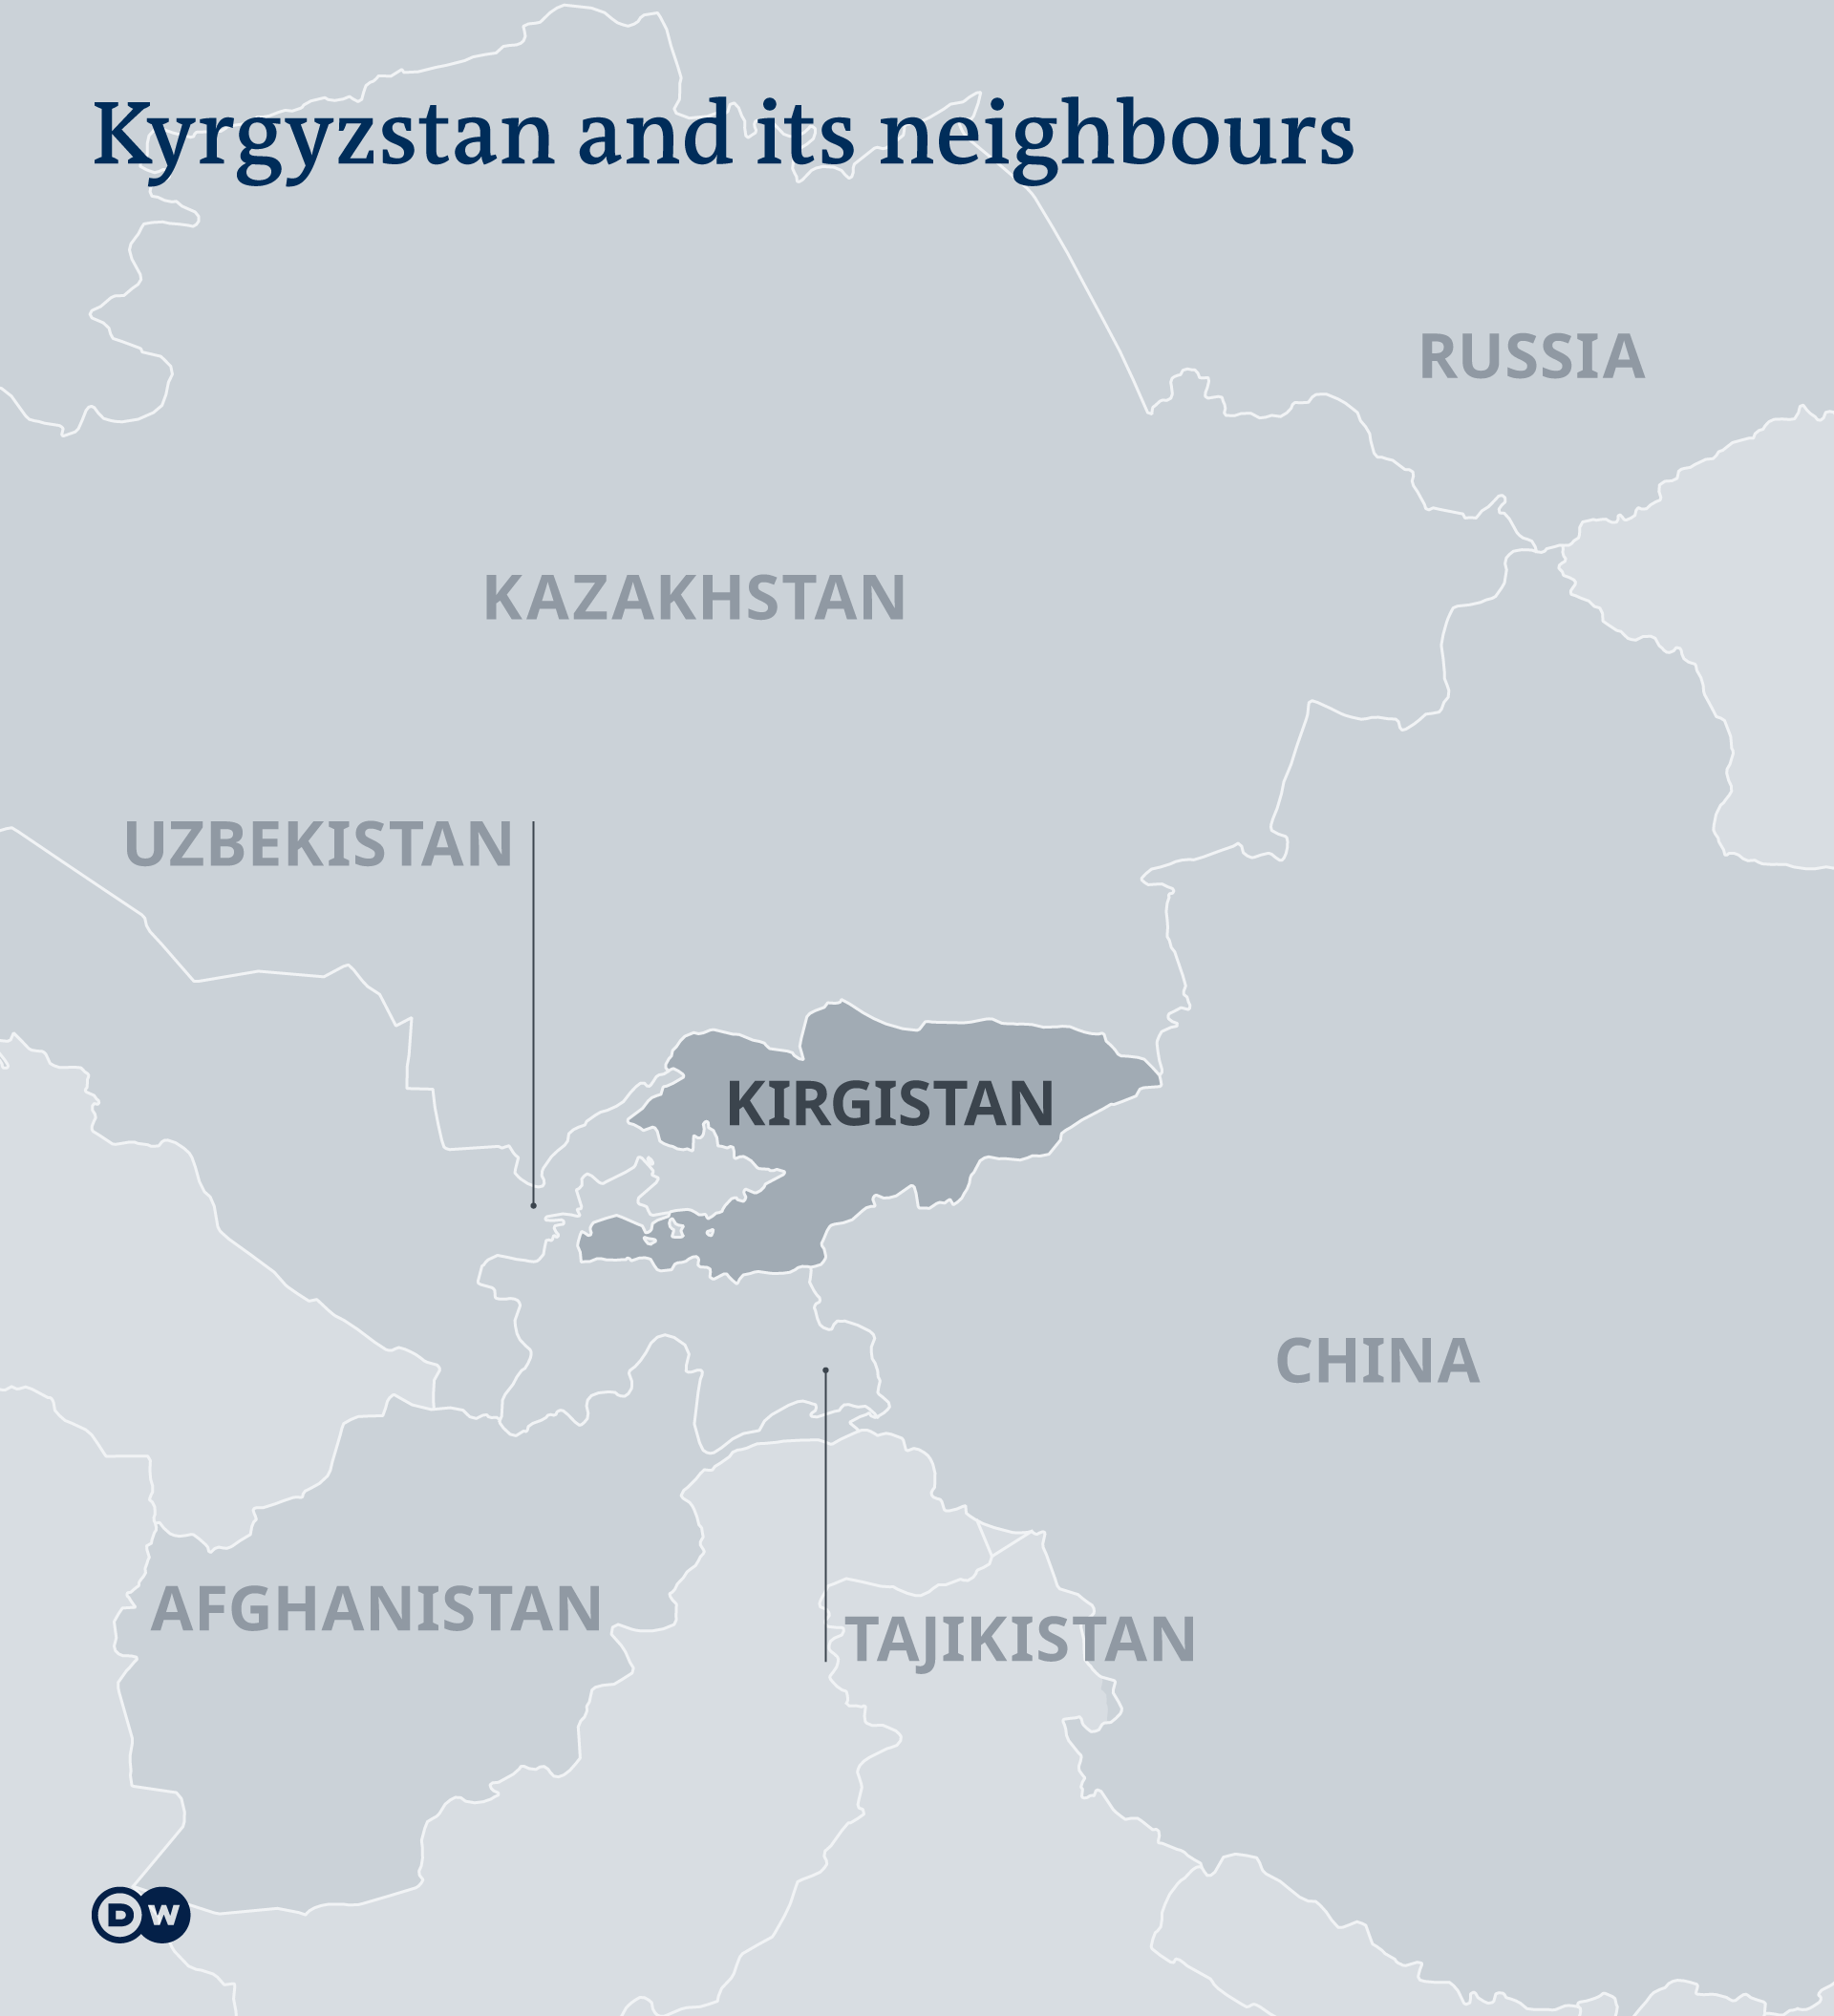 Graphic: Map of Kyrgyzstan and its neighbours (source: DW)